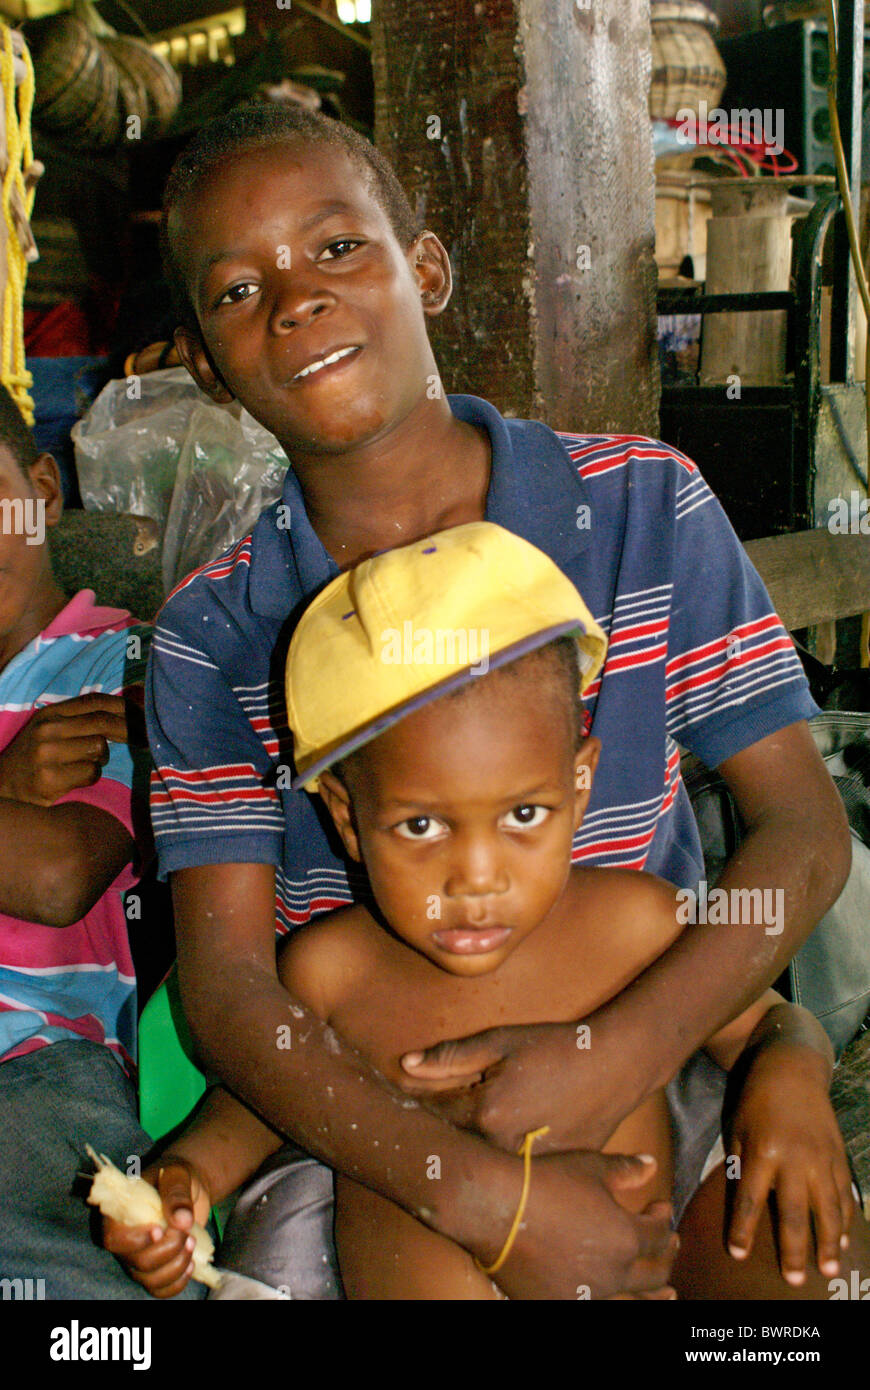 garifuna-boy-and-his-little-brother-in-t